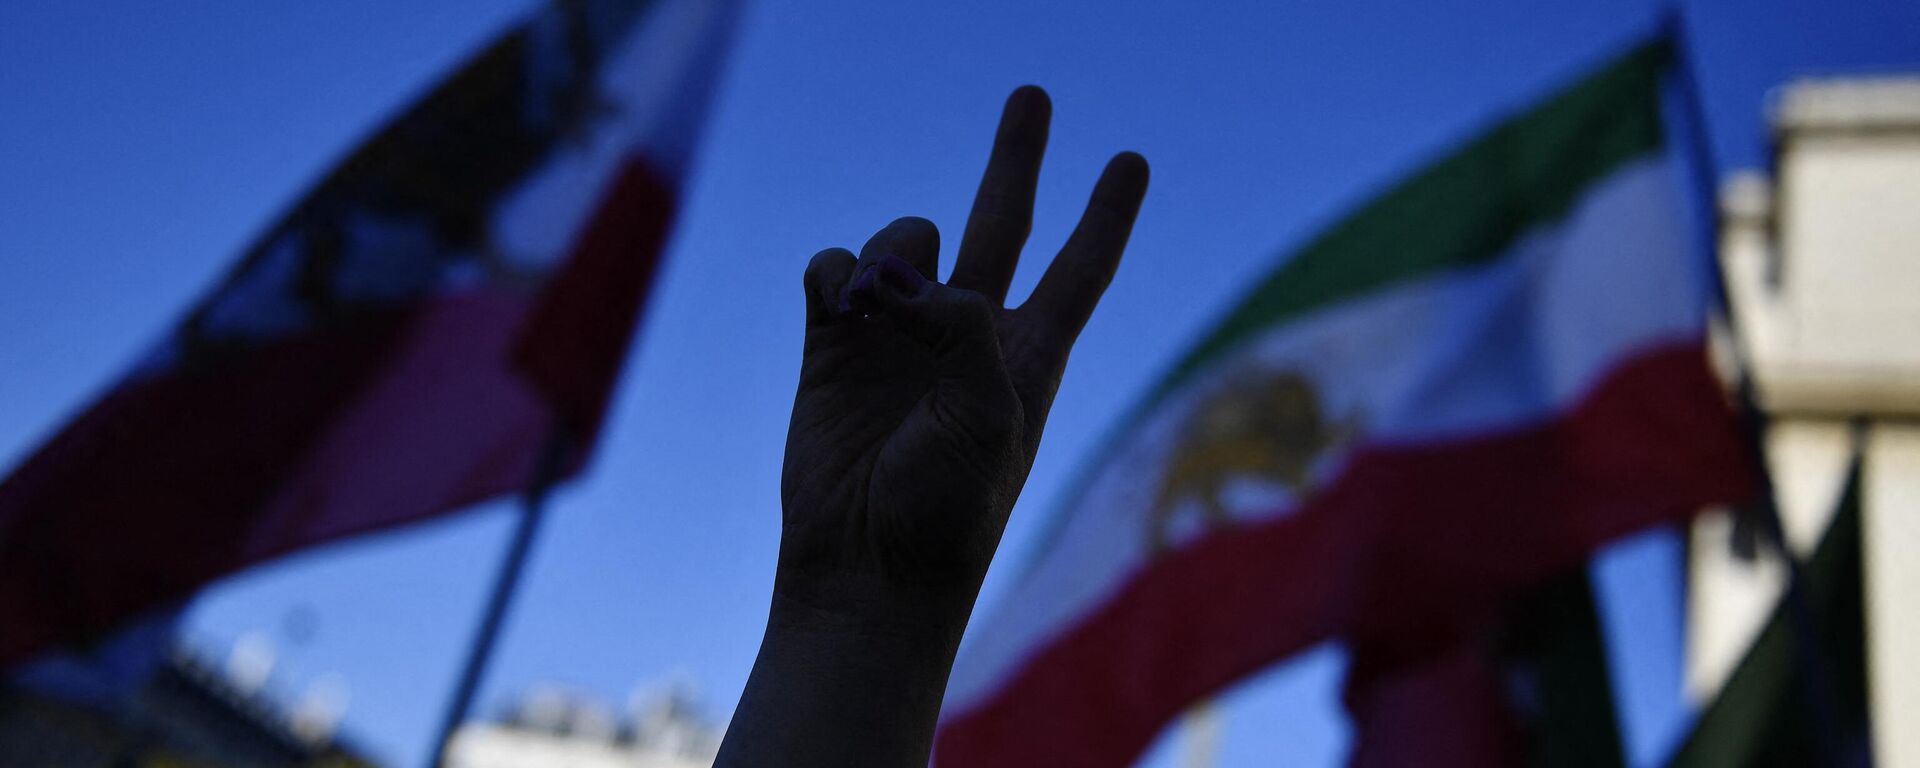 A demonstrator gestures a peace sign during a rally in support of Iranian protests, in Paris,on October 9, 2022, following the death of Iranian woman Mahsa Amini in Iran - Sputnik International, 1920, 23.11.2022